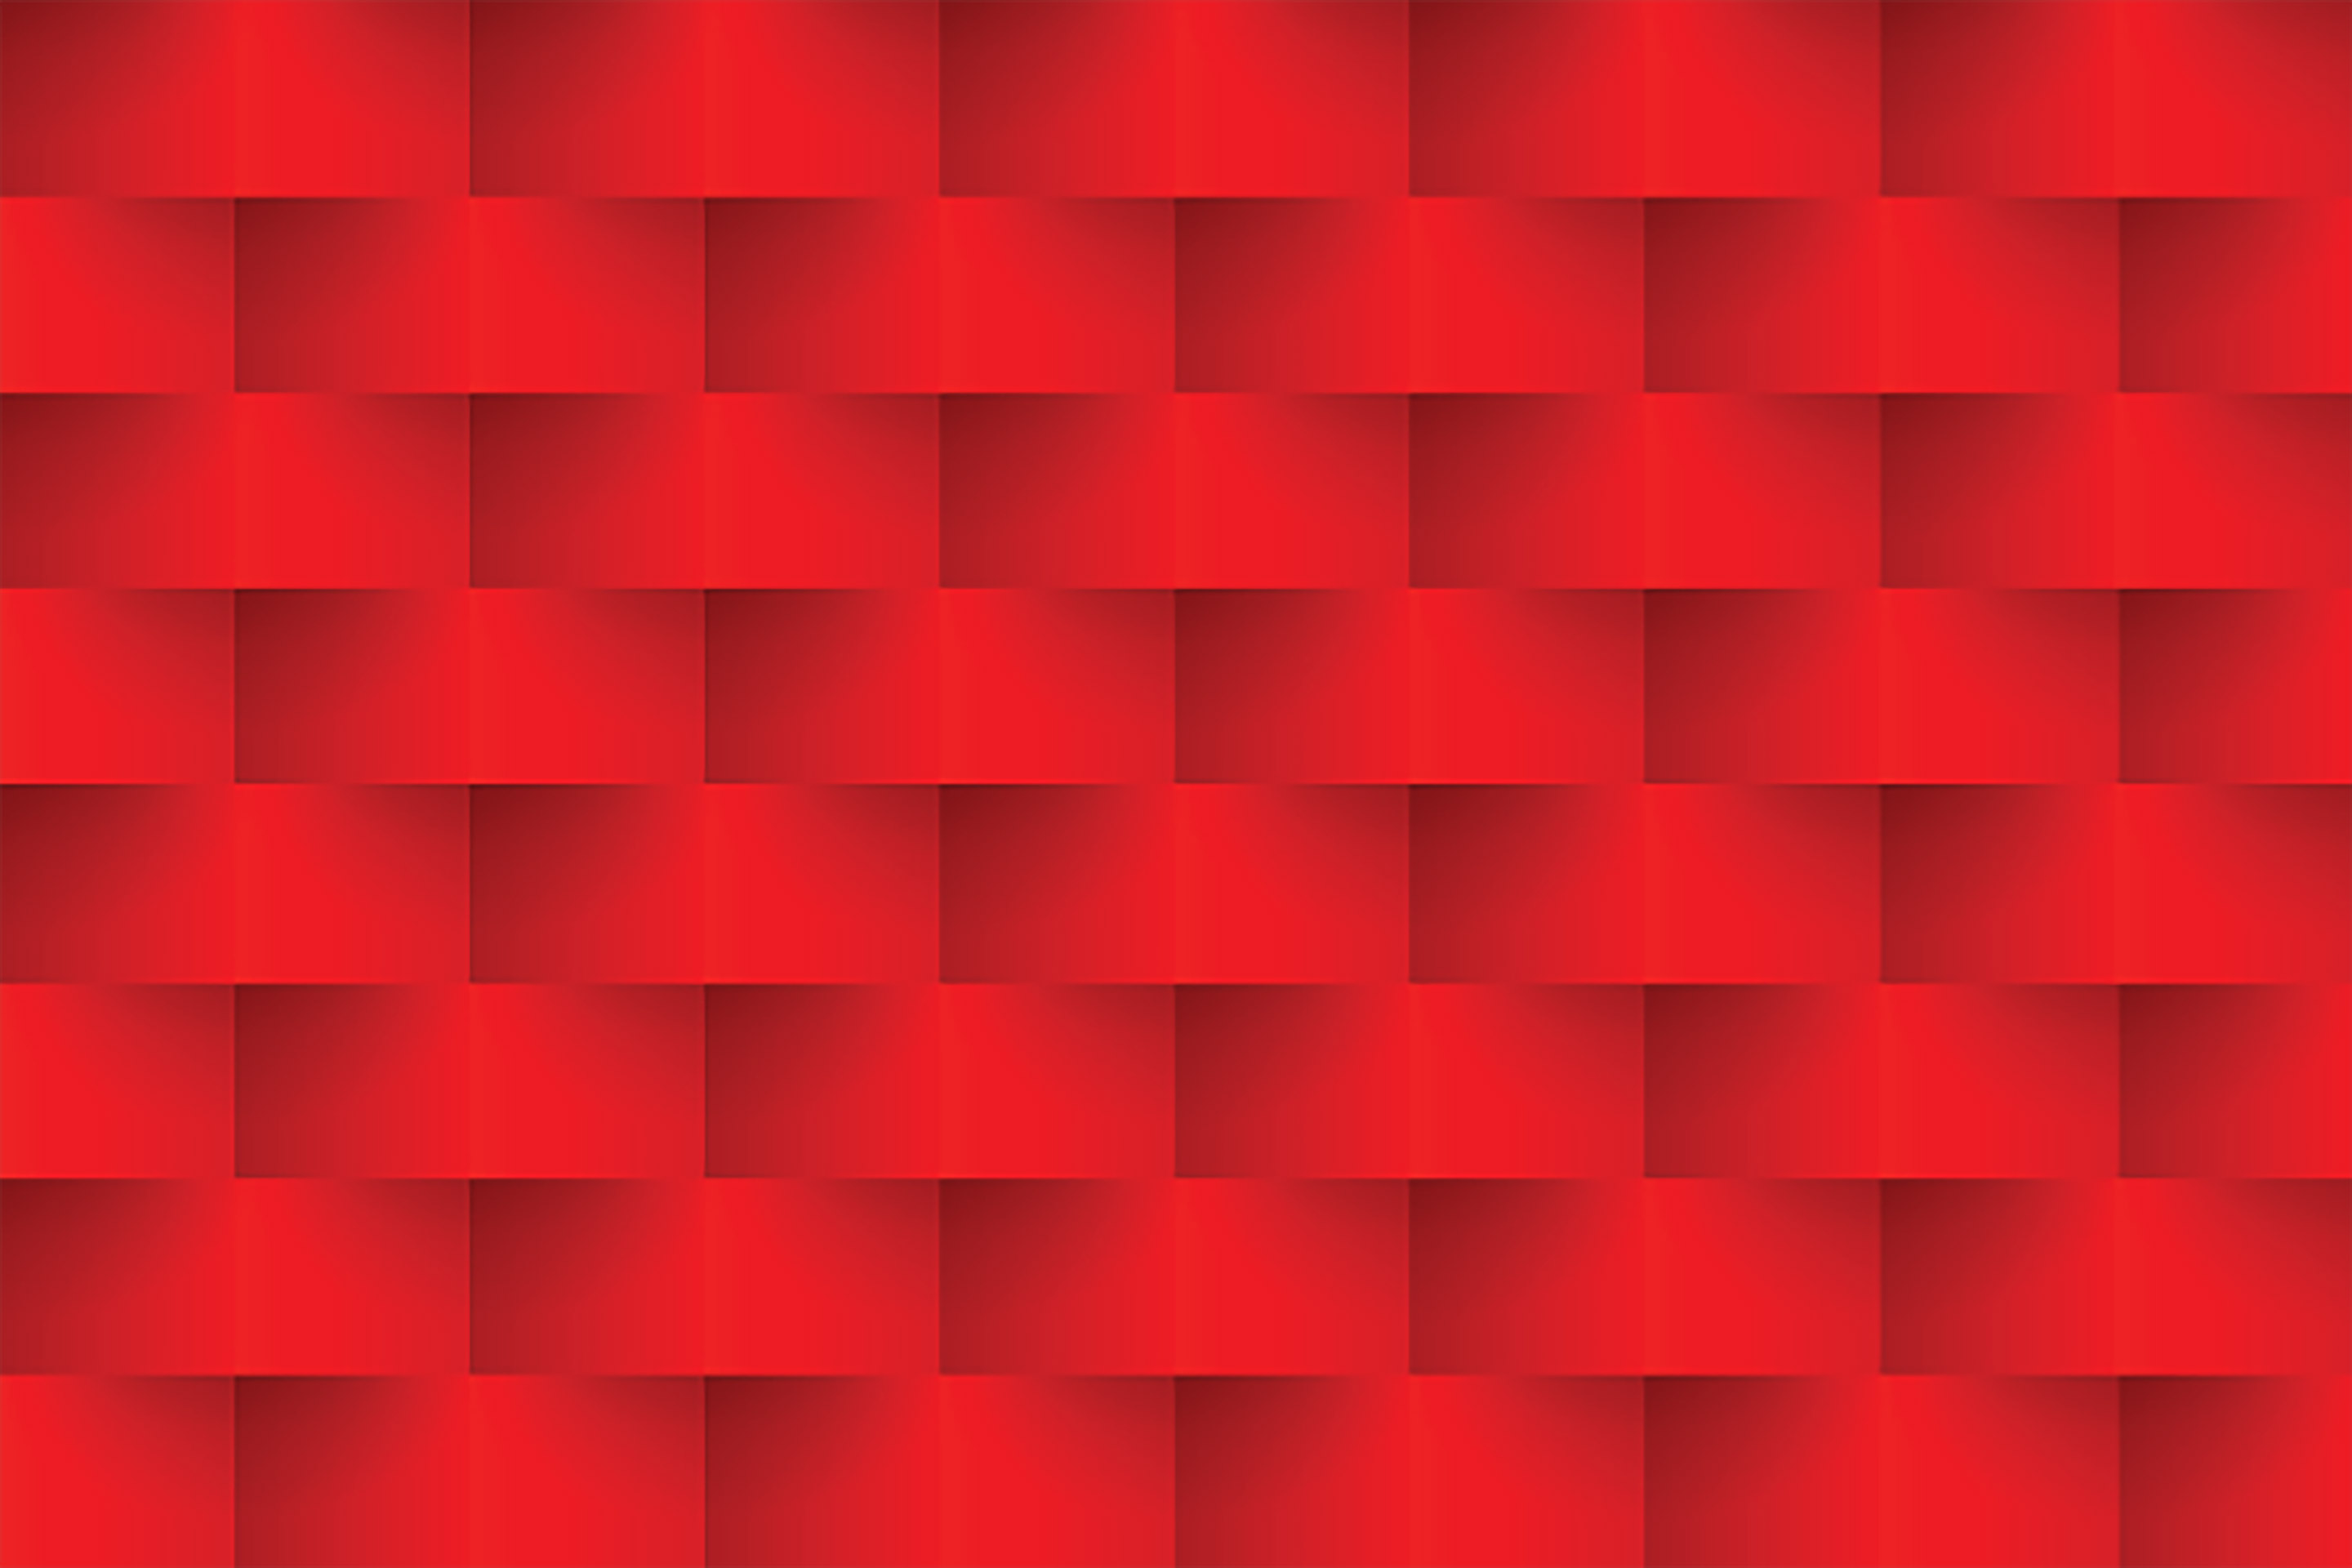 A red woven pattern across the screen shows symmetry and predictability.